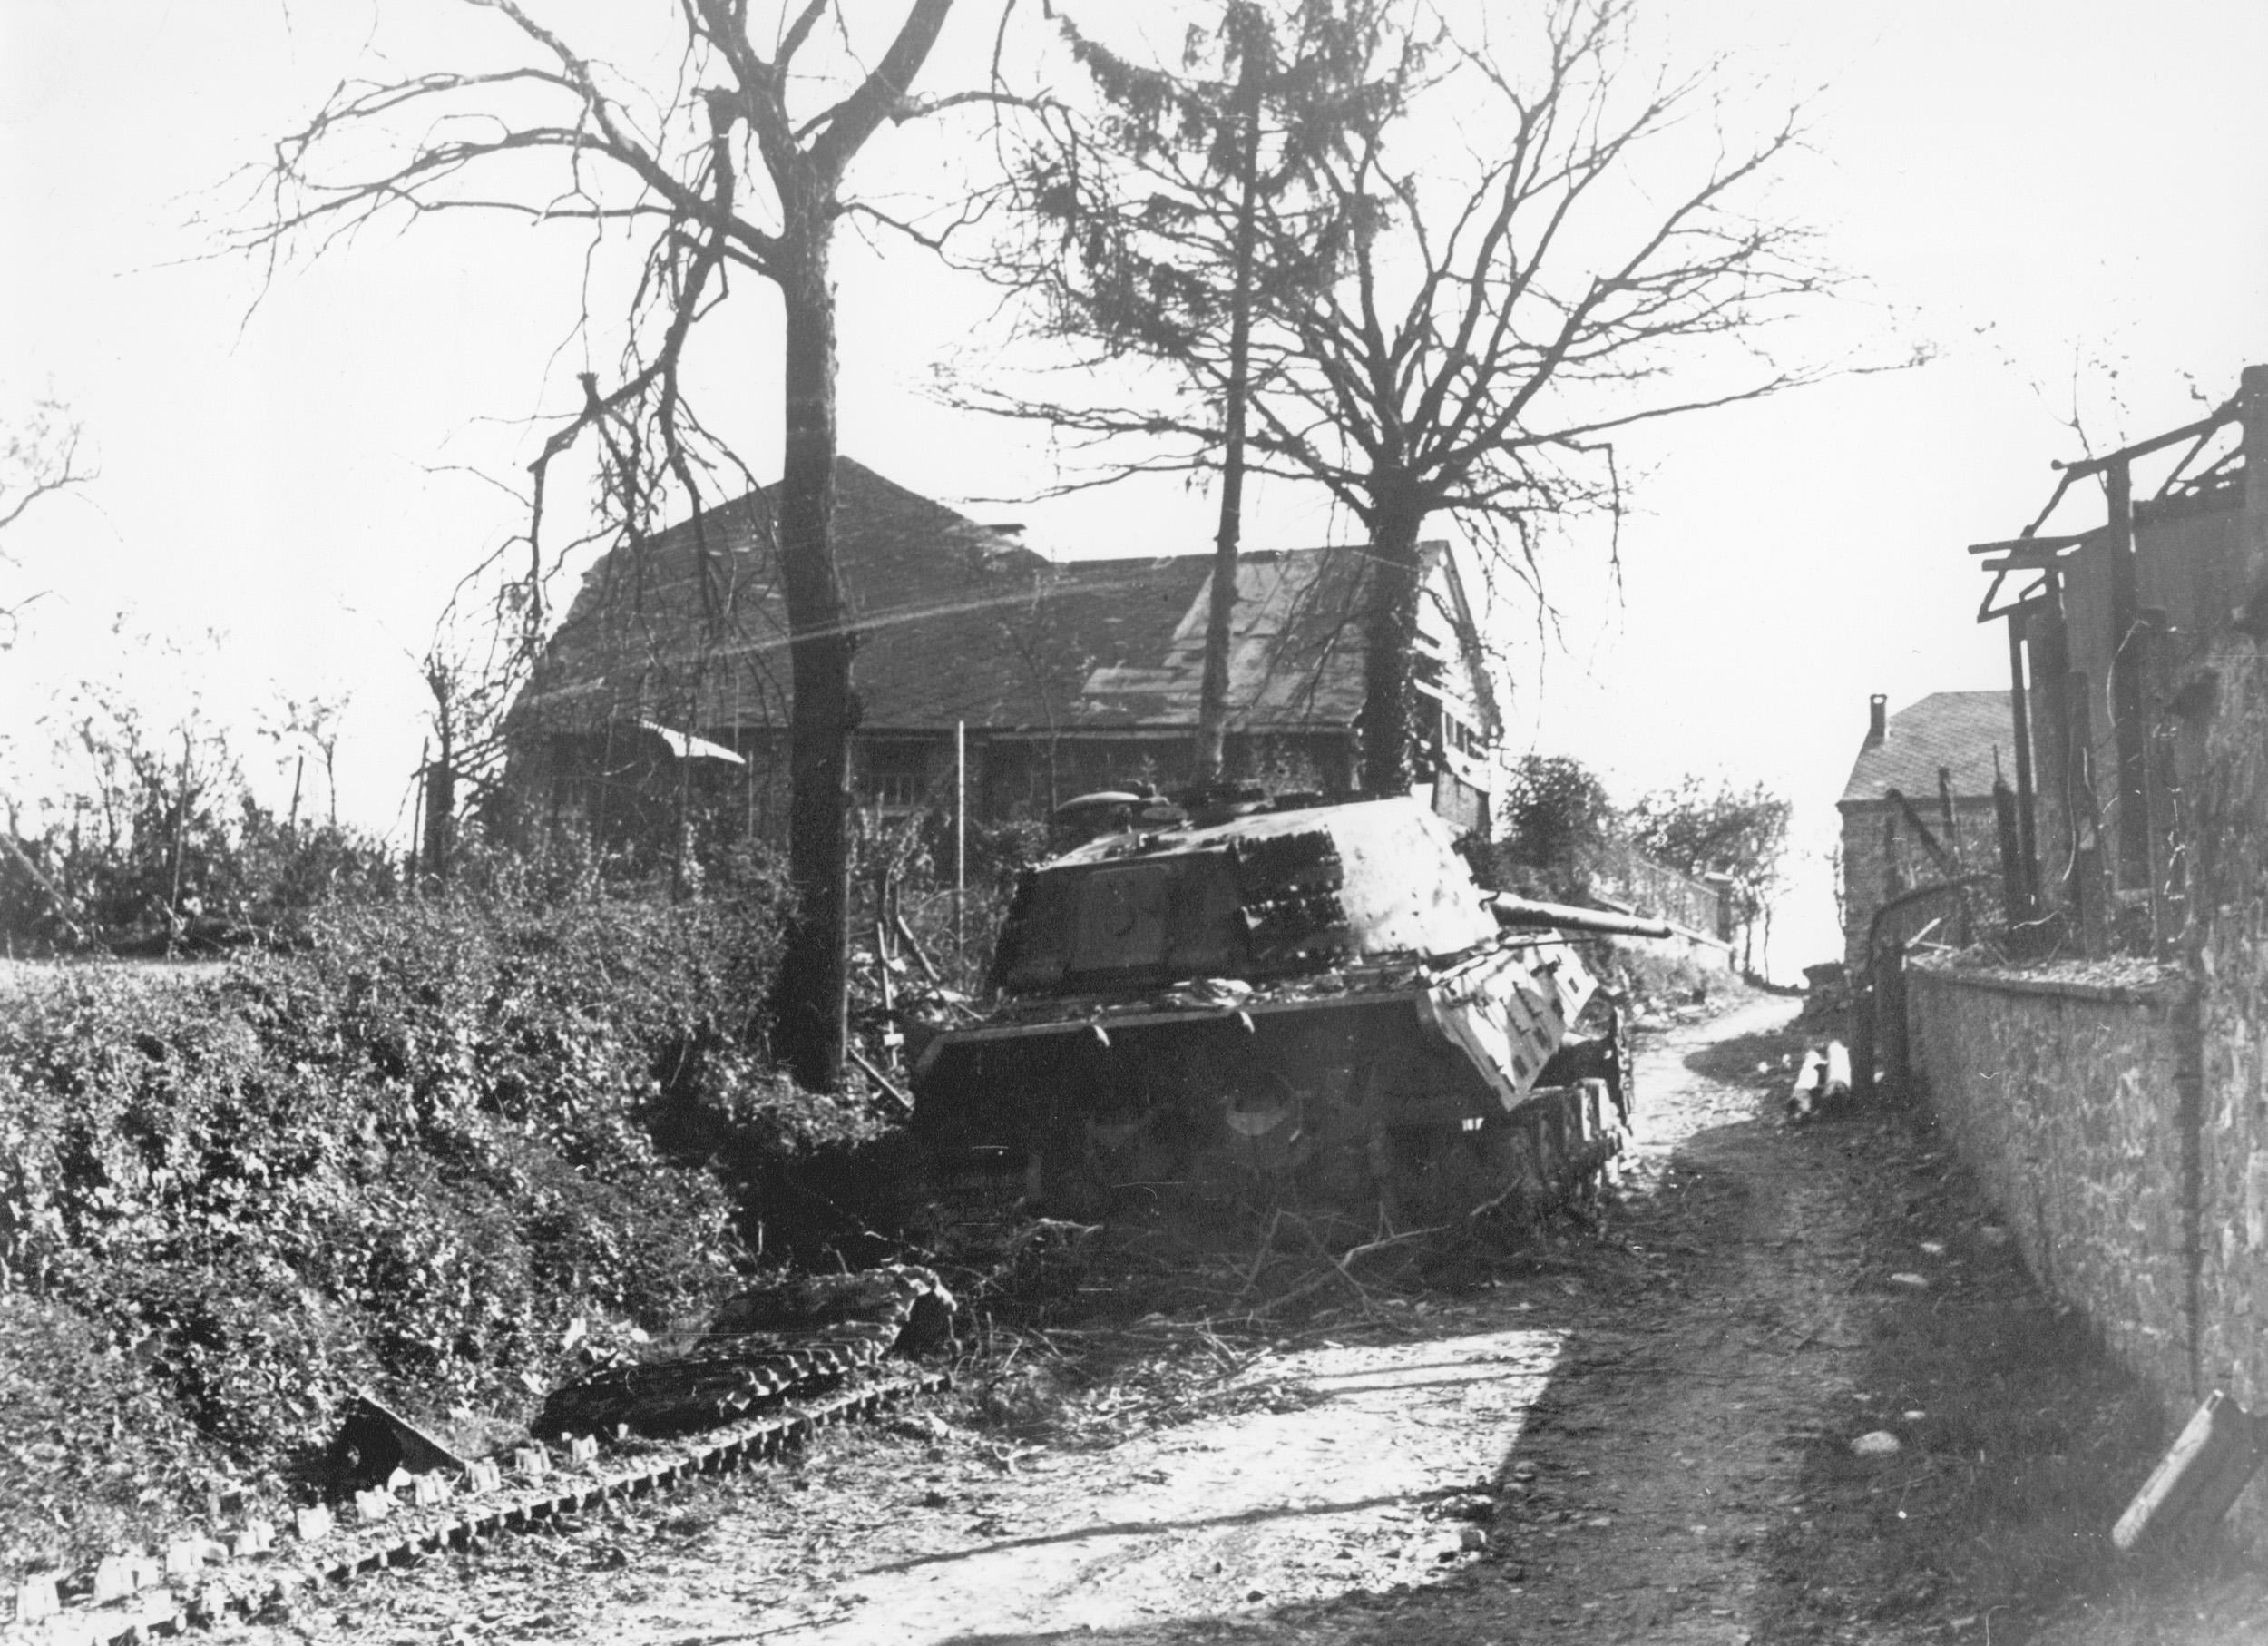 Destroyed by concentrated Allied fire, a burned-out German tank lies abandoned along a country lane in Belgium. Peiper’s armored force was severely mauled as the initial gains of the Bulge were contained.